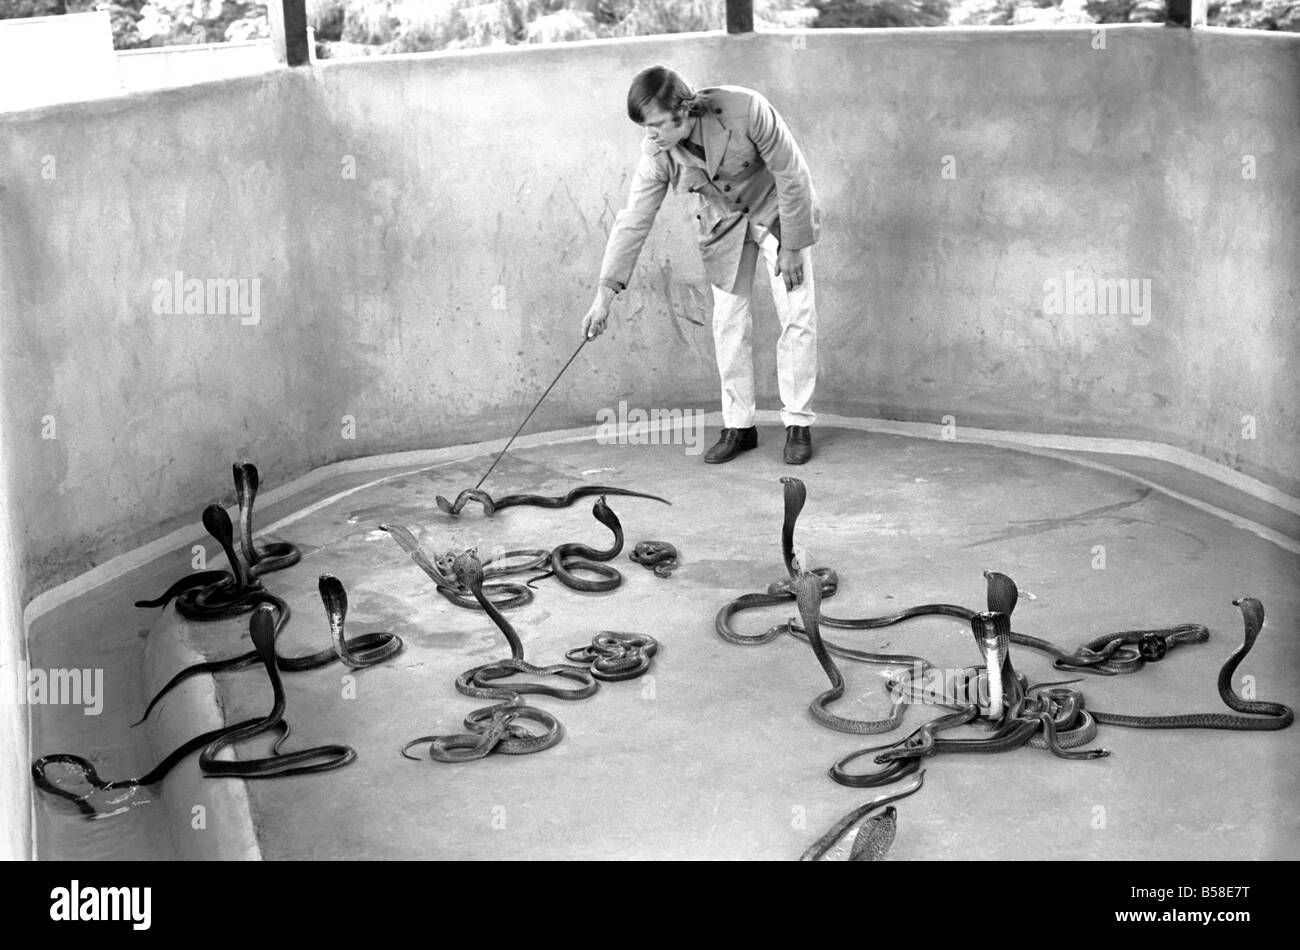 Snakes: Watched warily by his wife Patricia, snake handler Peter Waters goes back to work six days after one of his charges nearly killed him. He said: 'it's like falling off a bicycle. You have to get on again to keep your nerve.' Peter, 24-pictured with cobras in the snake pit at the Wild Animals Kingdom at Woburn, Beds added: 'I'm lucky to be alive'. July 1970 70-6874-002 Stock Photo